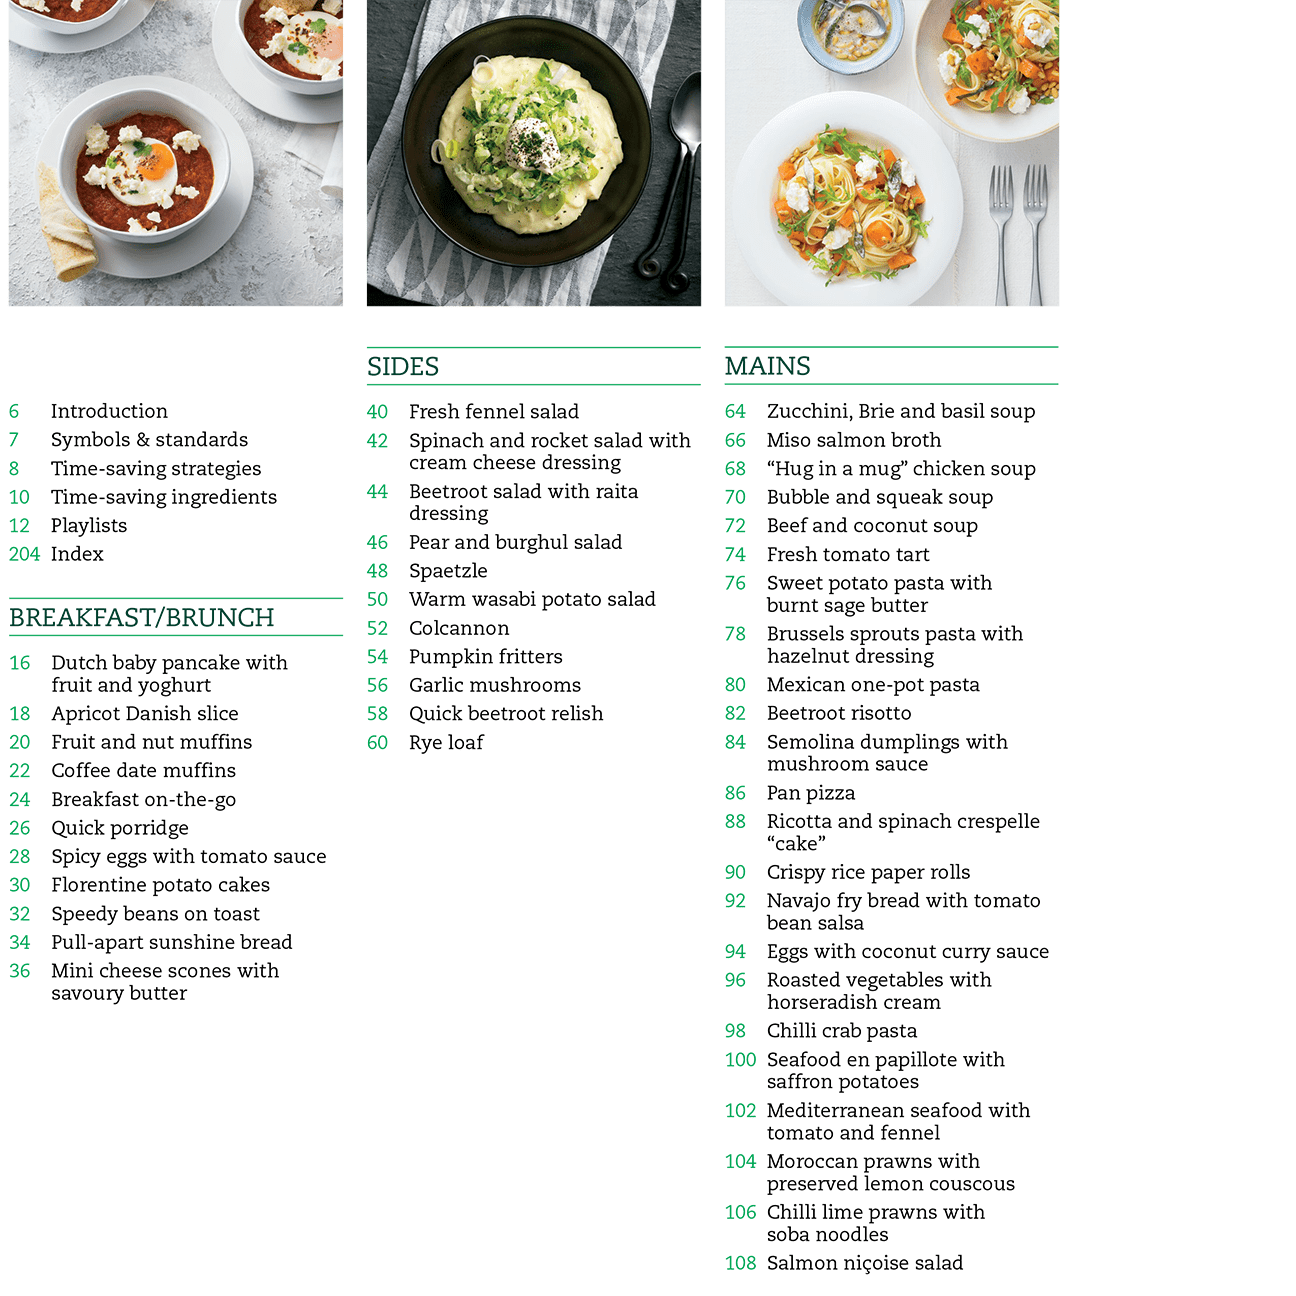 Thermomix Cookbook Thermomix Meals in a Flash Cookbook TM5 TM6